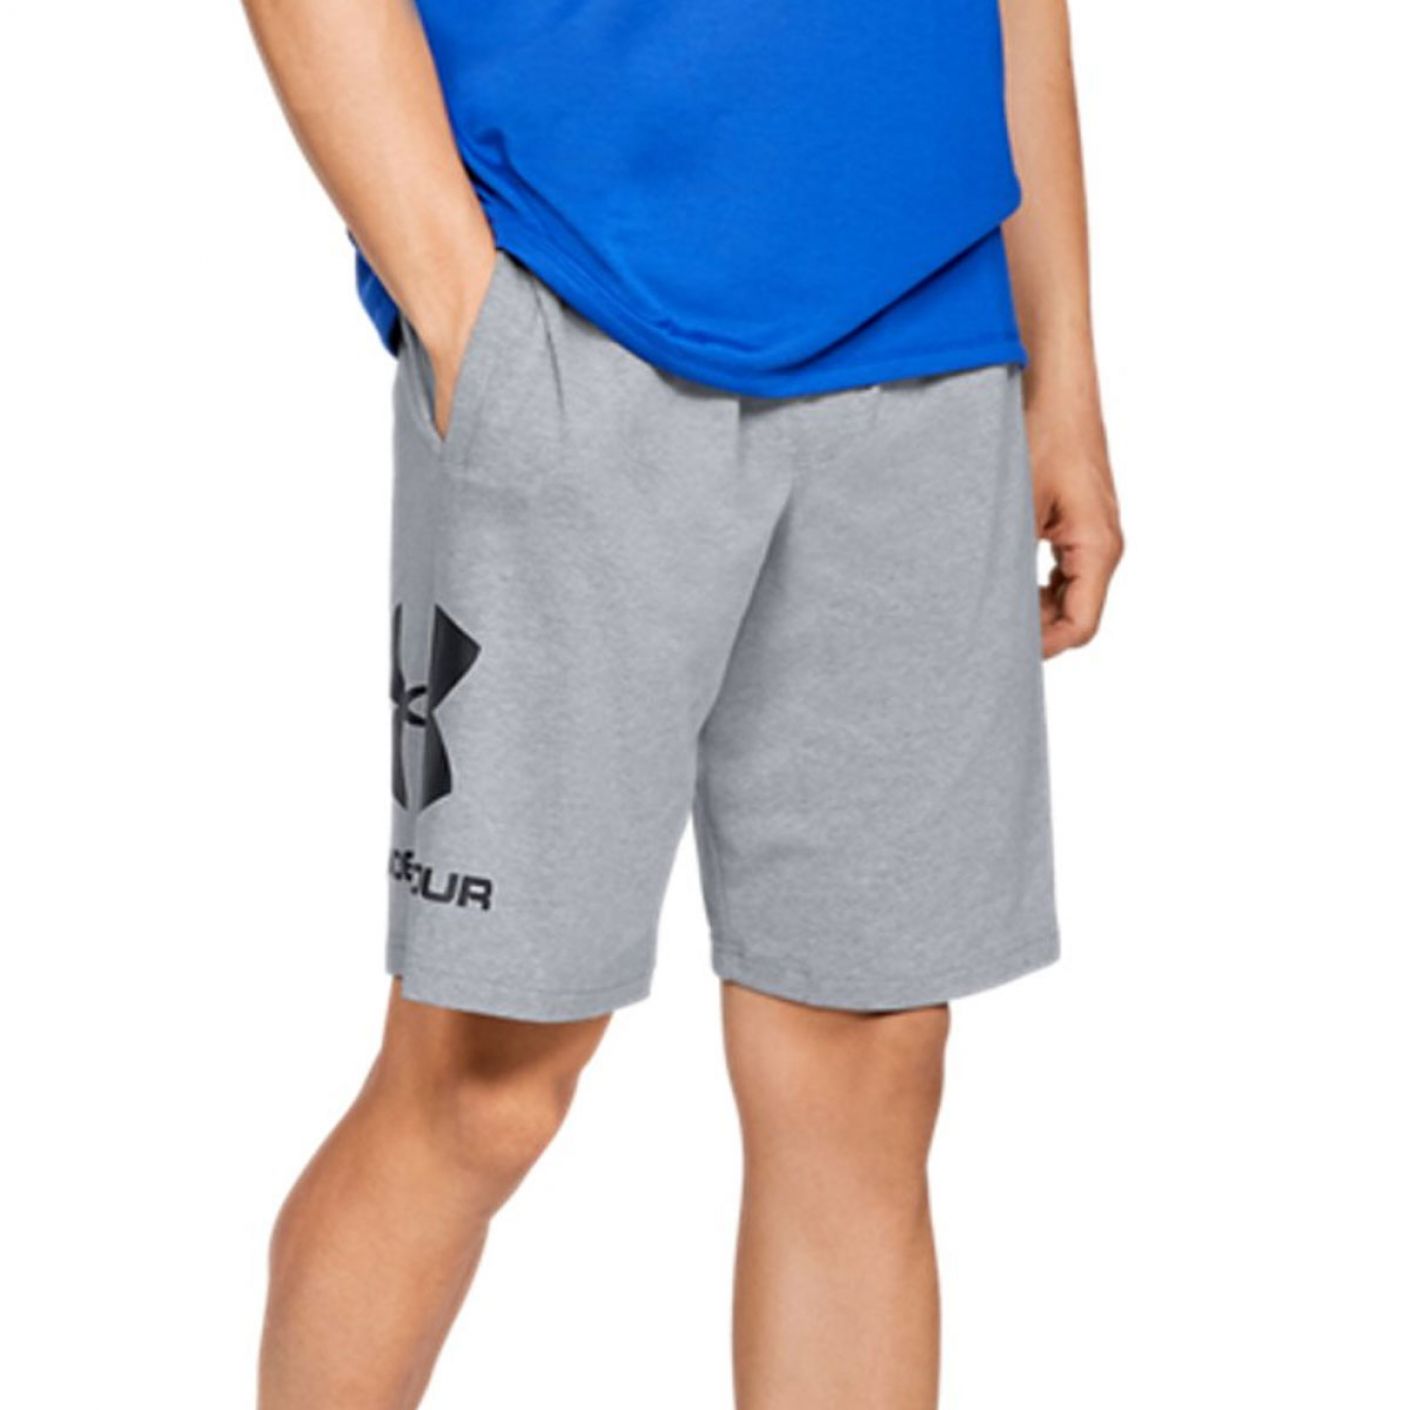 Under Armor Shorts Sportstyle in Gray Cotton